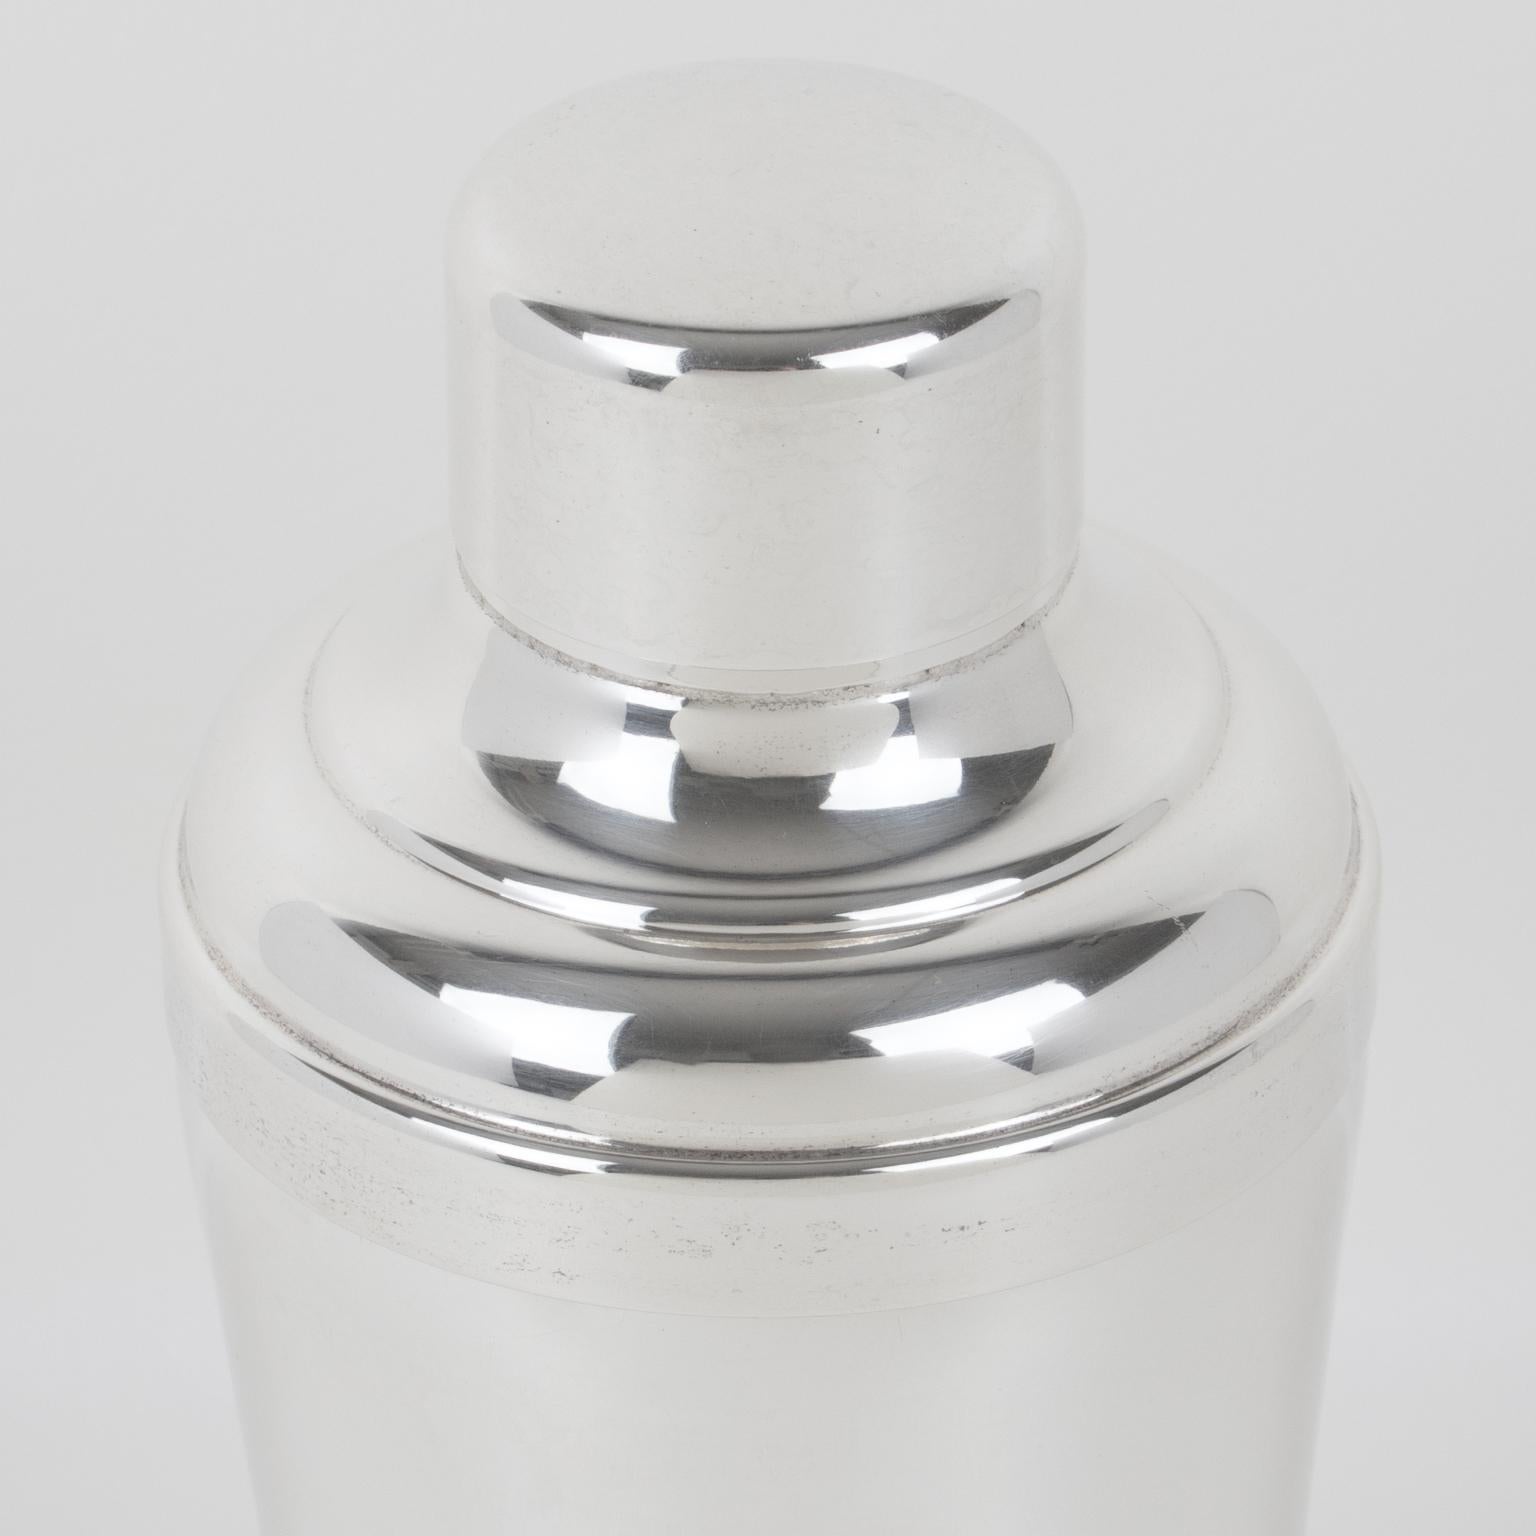 Mid-20th Century Art Deco Silver Plate Cocktail Shaker by Gelb France, in Box For Sale